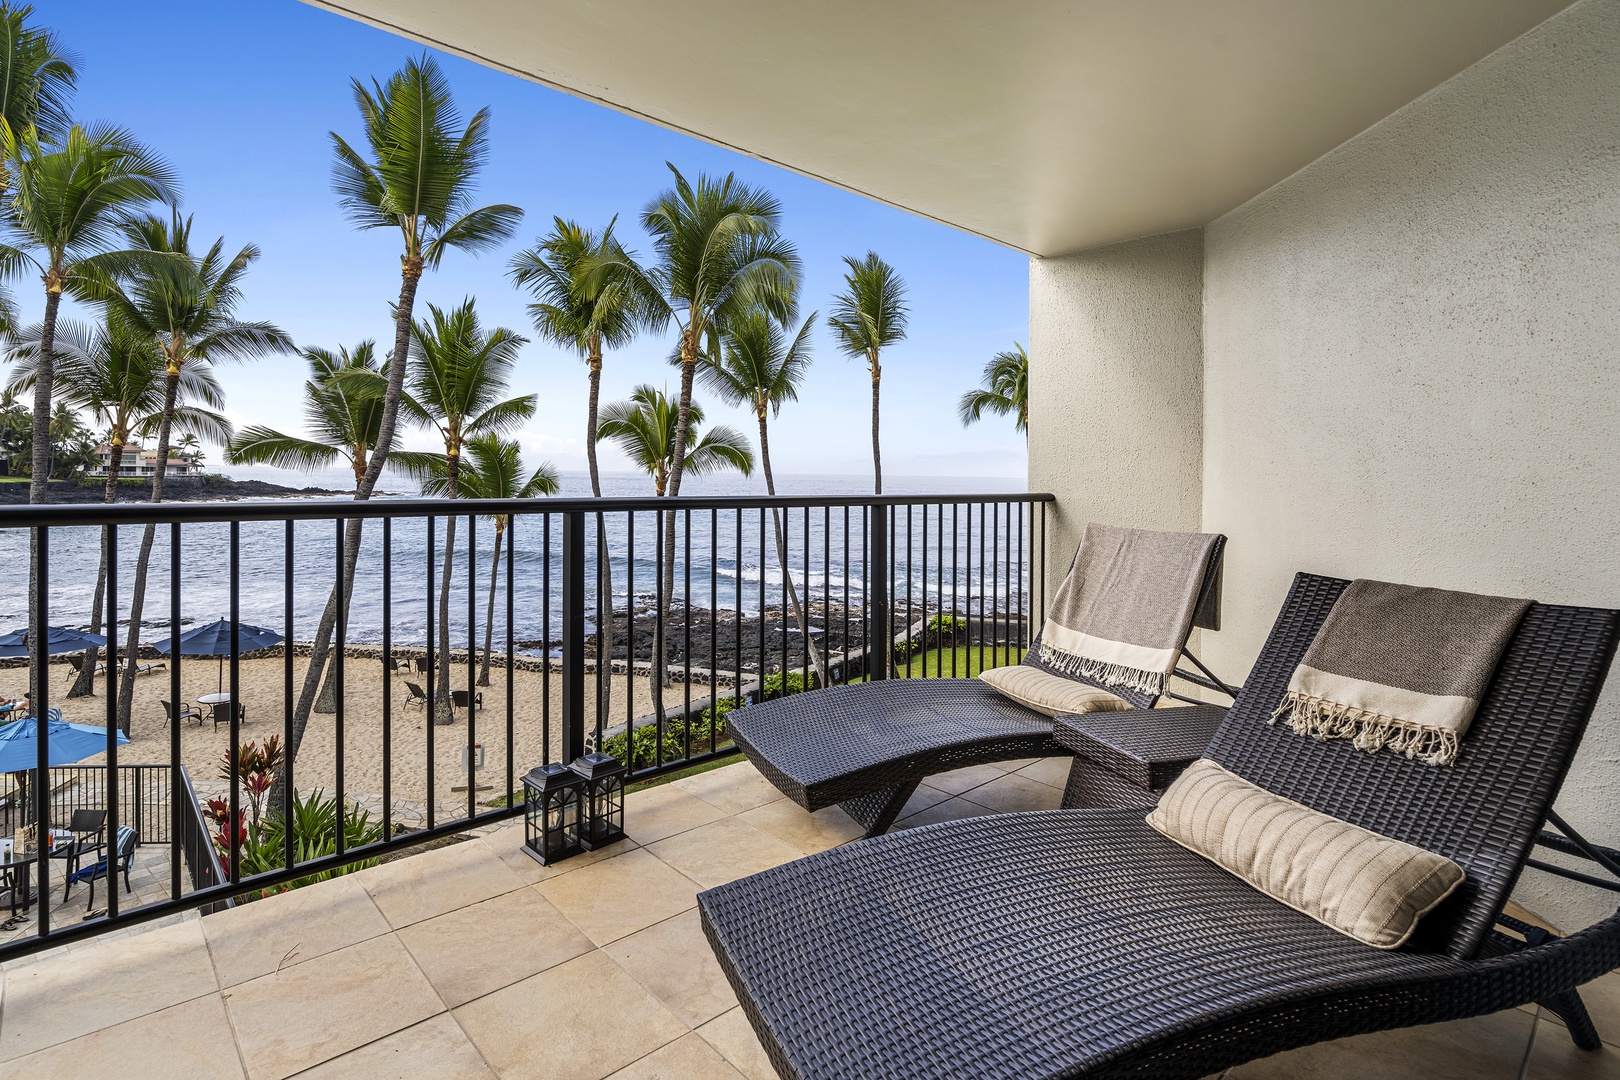 Lounge chairs in the lanai